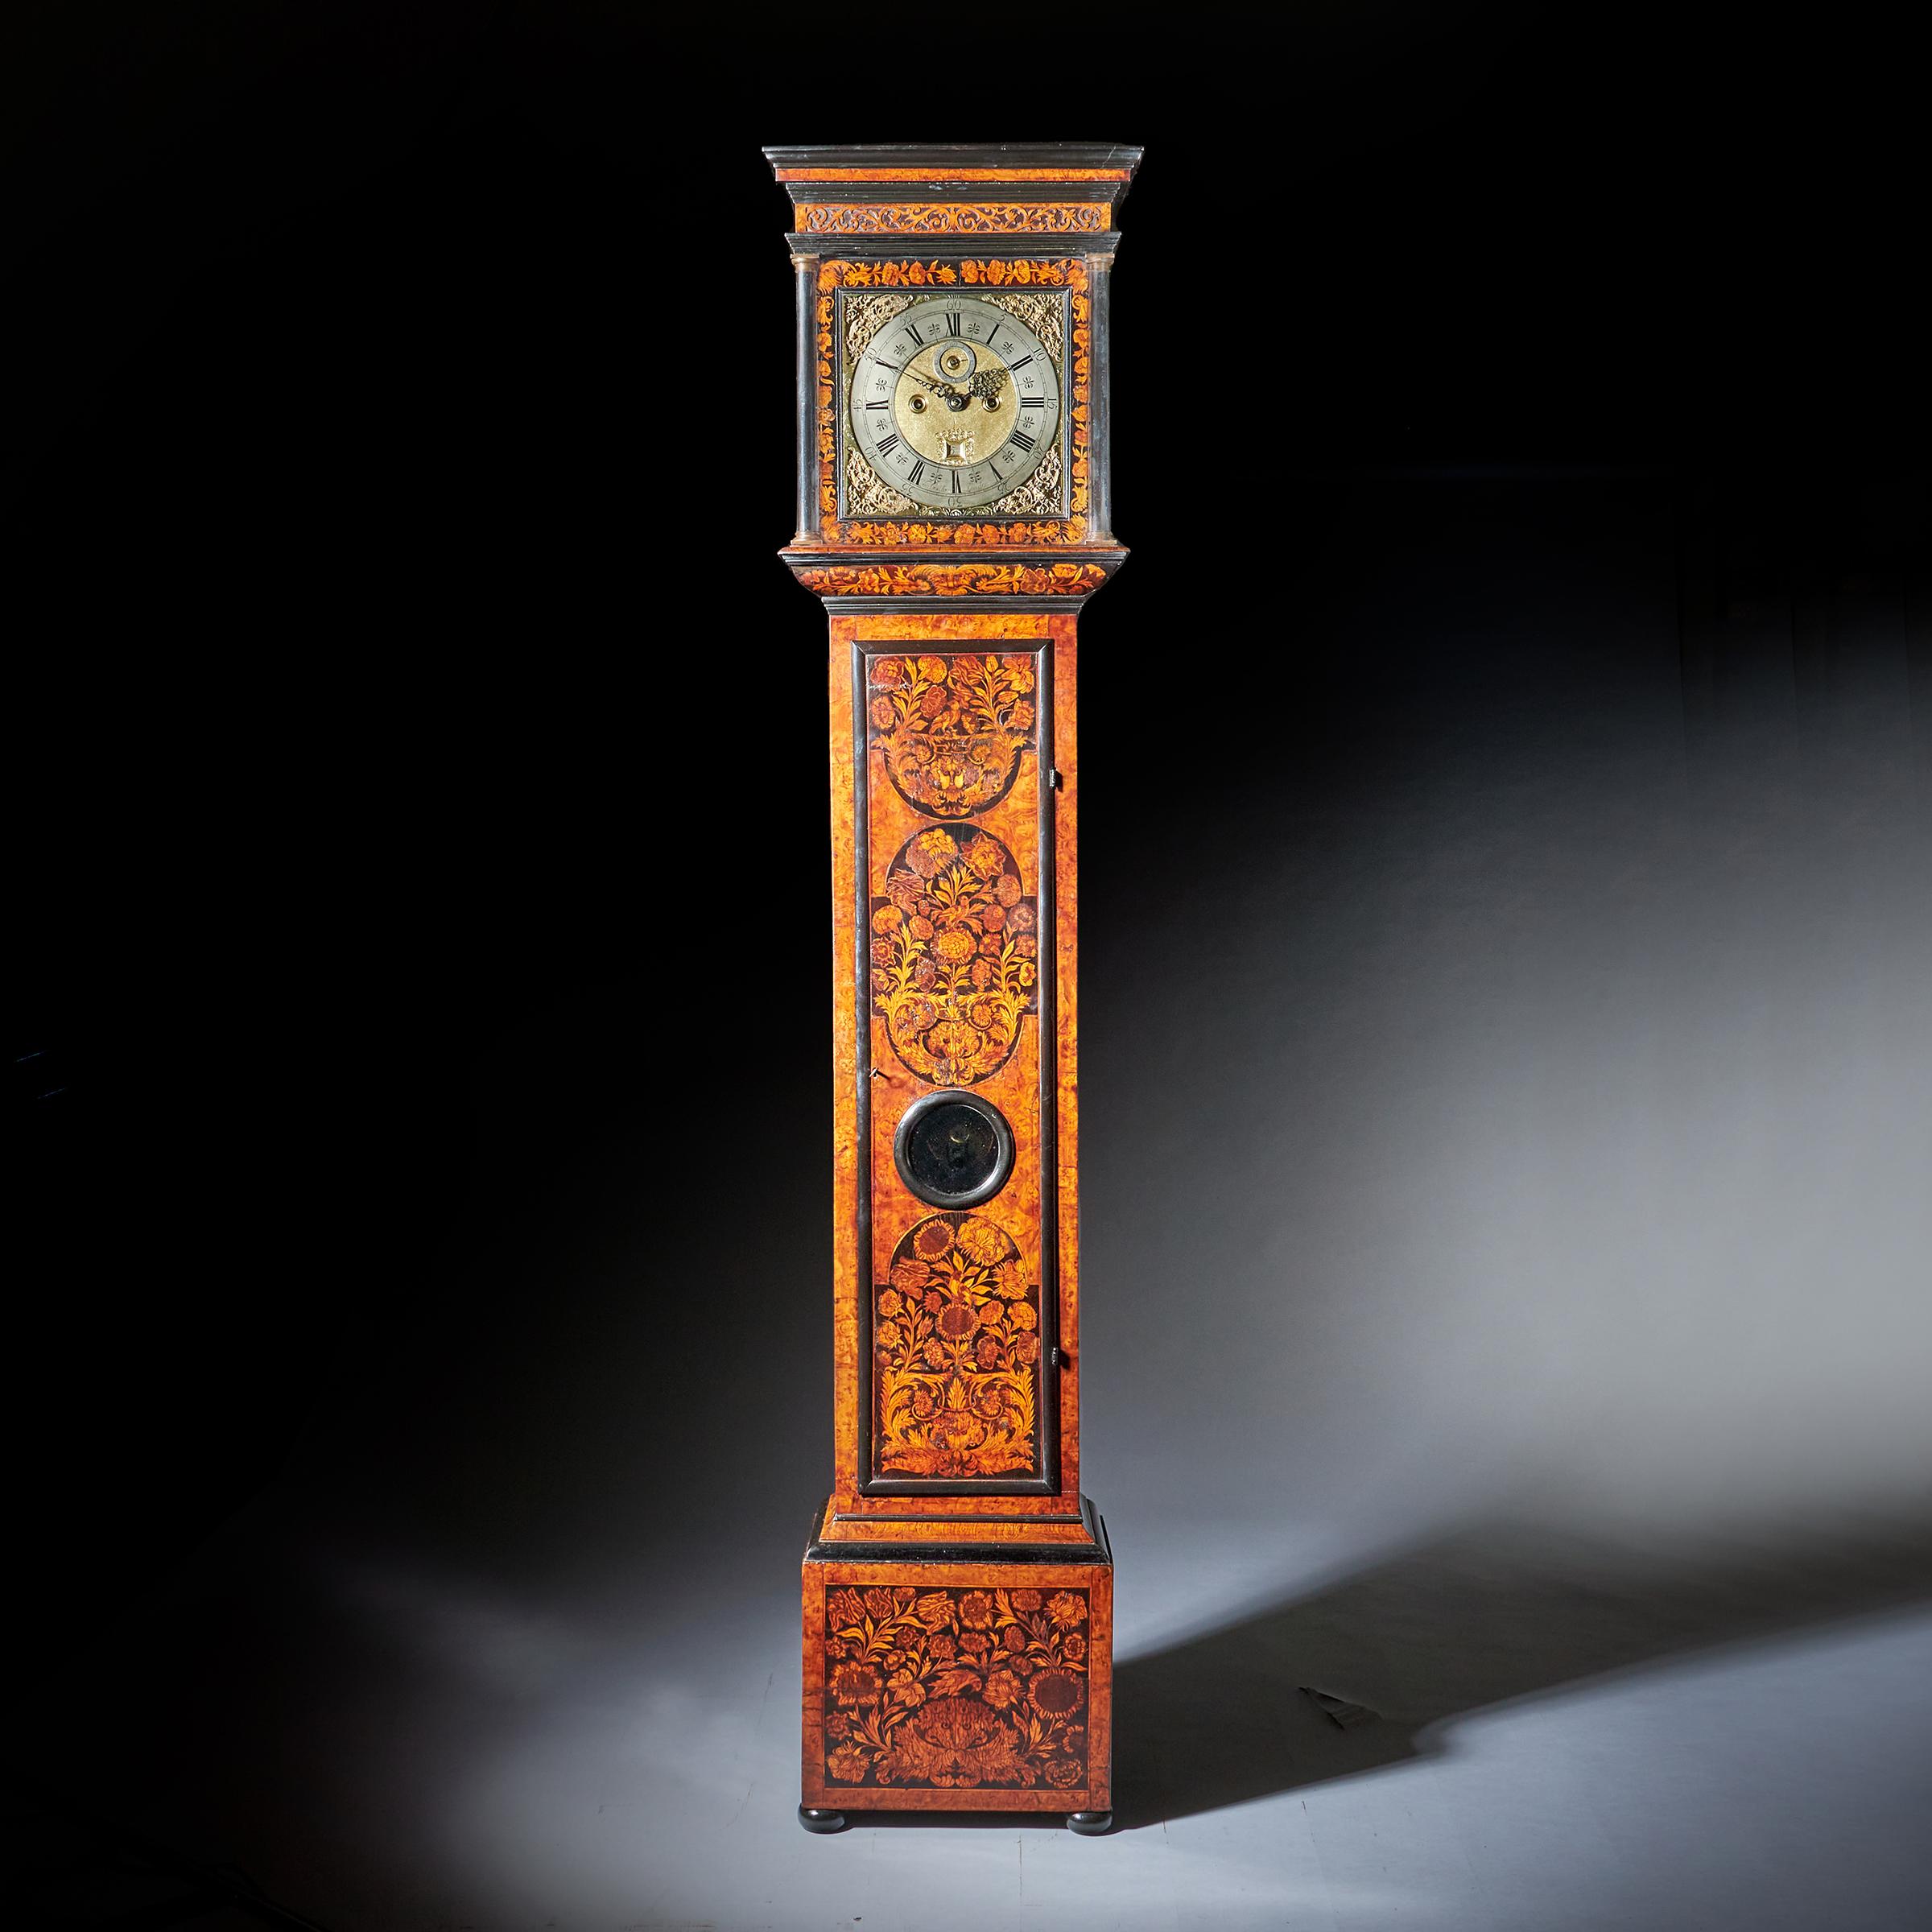 A superb William and Mary eight-day burl elm floral marquetry longcase clock by Henry Godfrey London, c. 1695-1700.

The outstanding burl elm case is of the highest quality and decorated throughout in very attractive floral and leaf marquetry